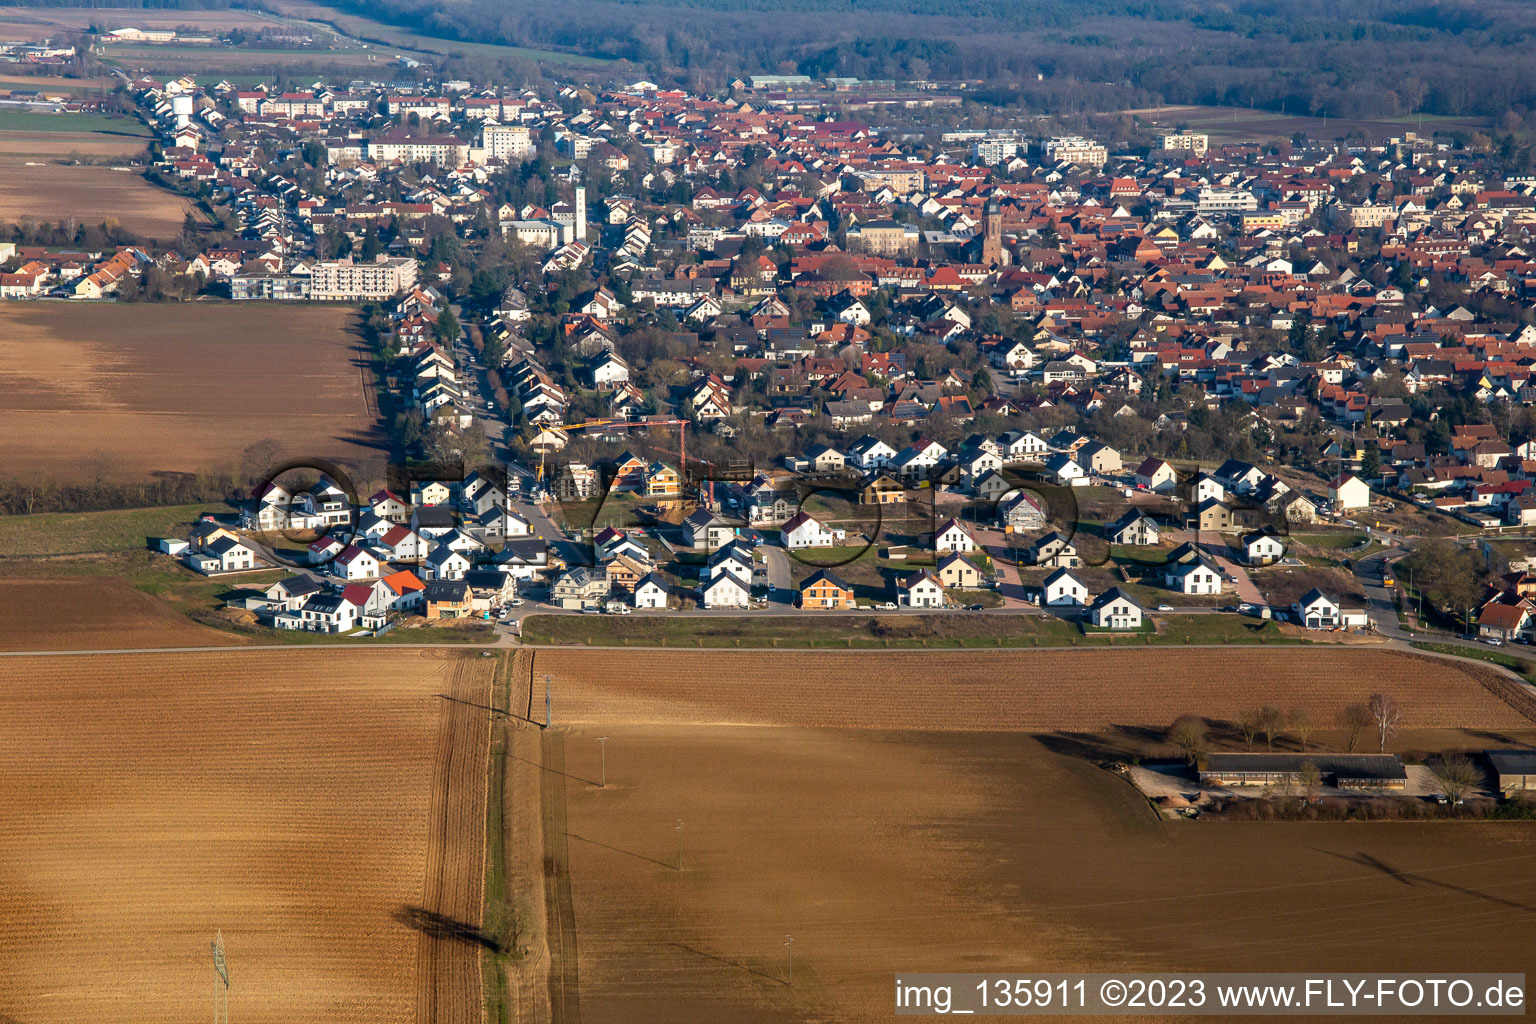 New development area K2 in winter in Kandel in the state Rhineland-Palatinate, Germany